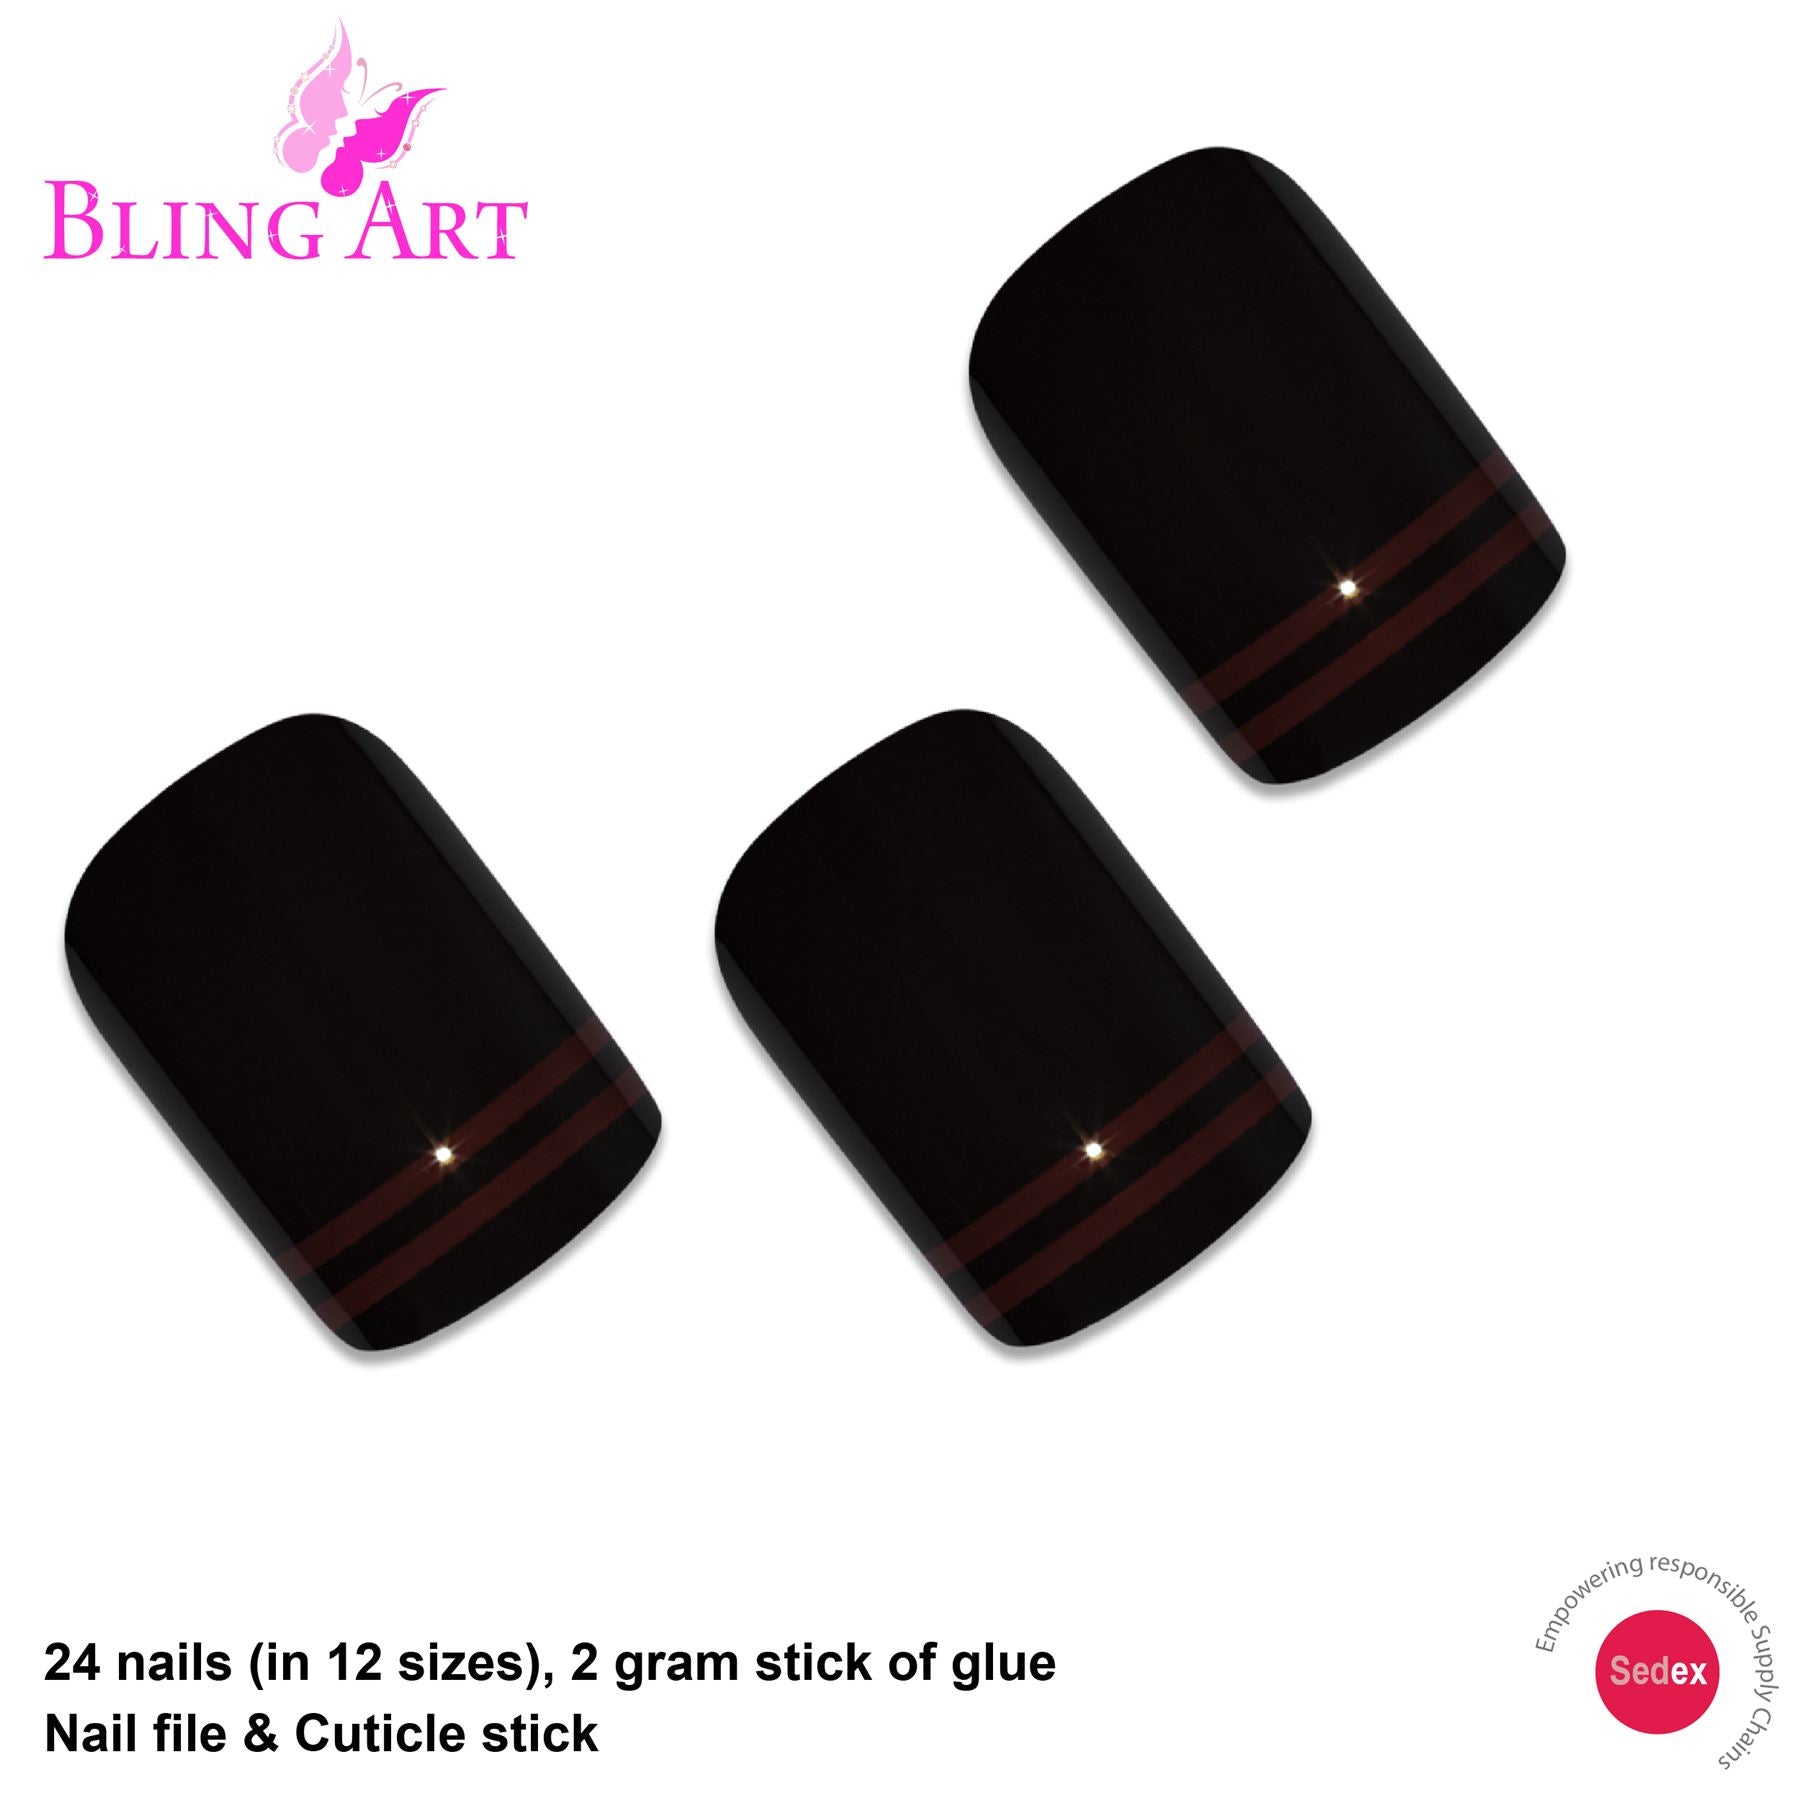 False Nails by Bling Art Black Red Glossy French Squoval 24 Fake Medium Tips